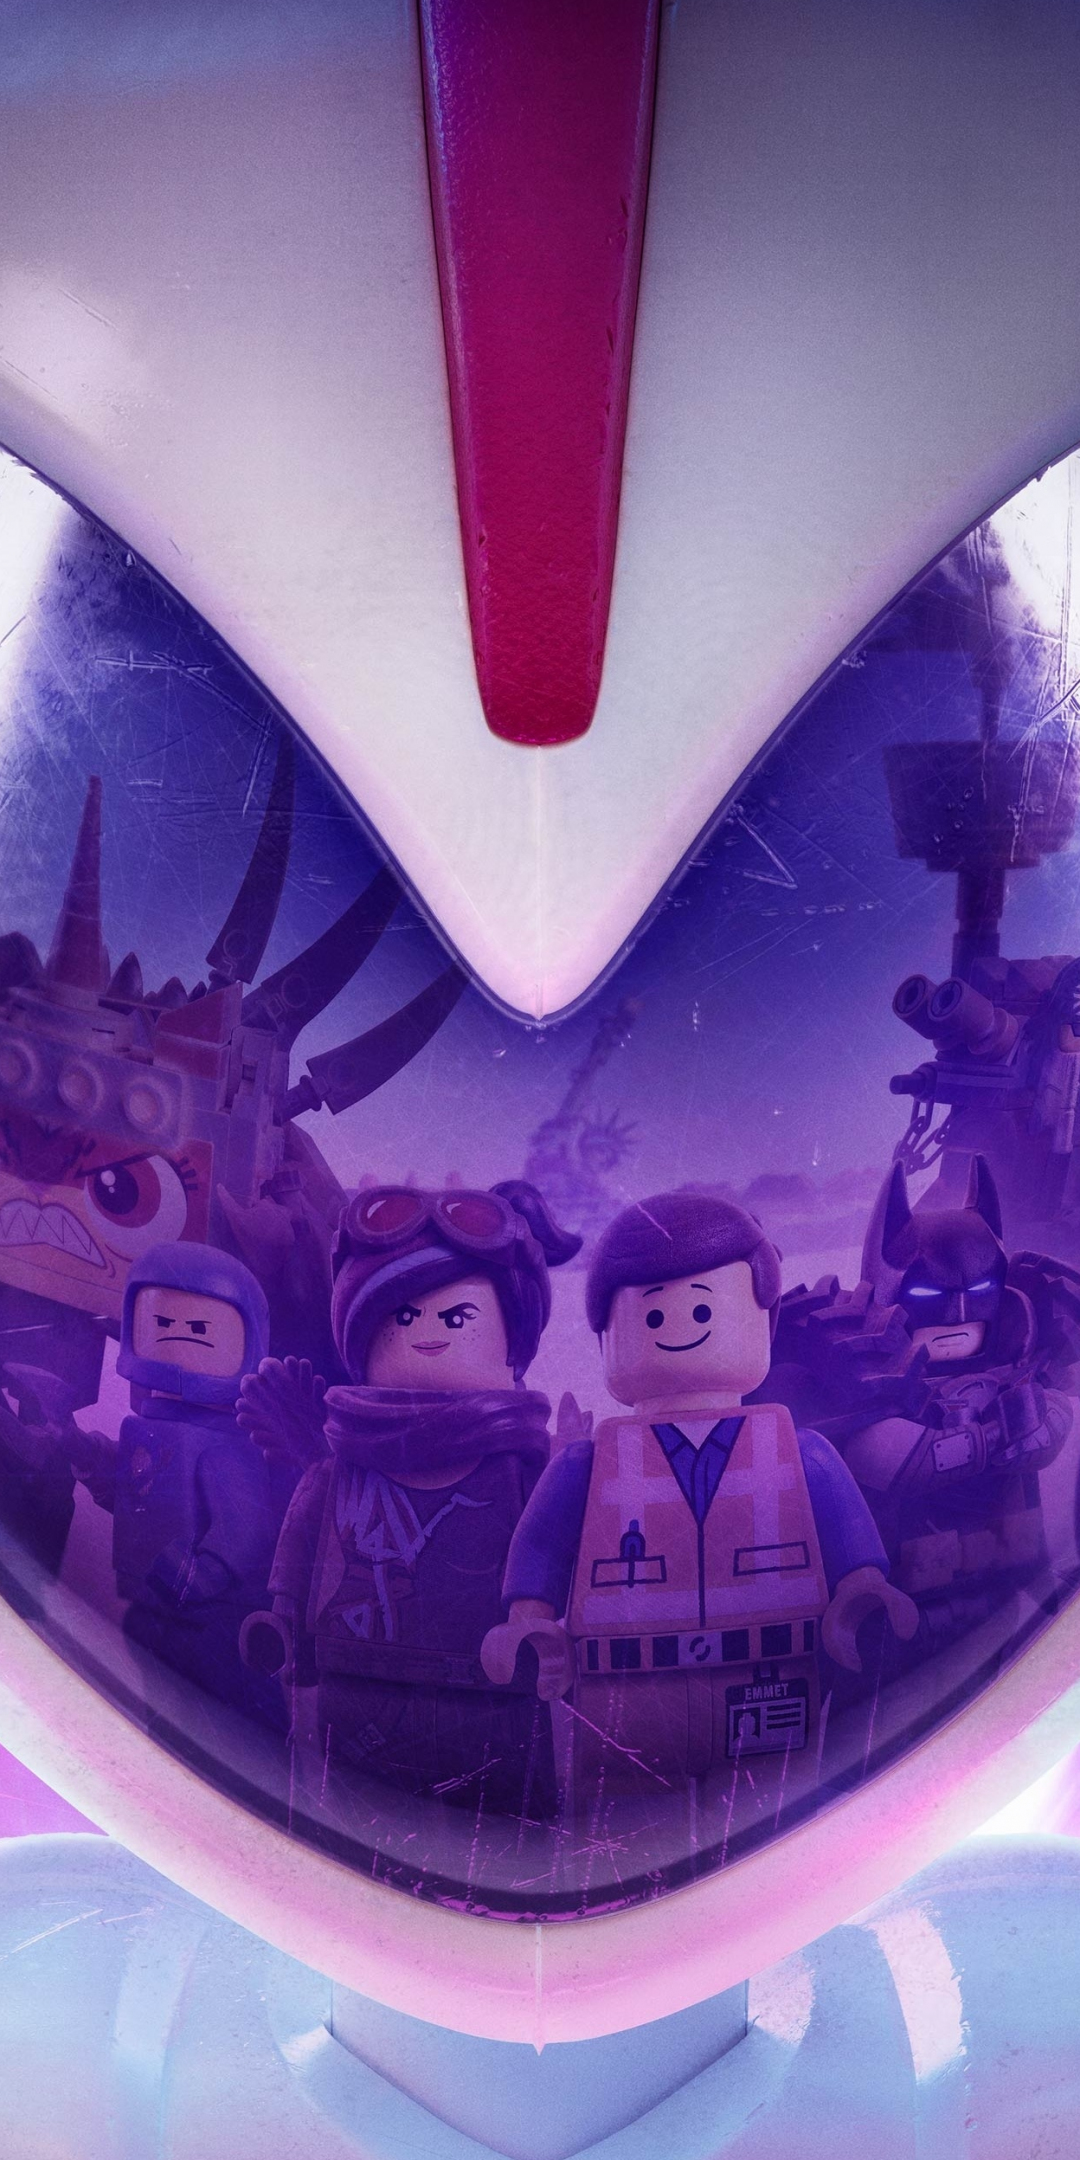 The Lego Movie 2: The Second Part, Robot, helmet's reflections, 2019, 1080x2160 wallpaper